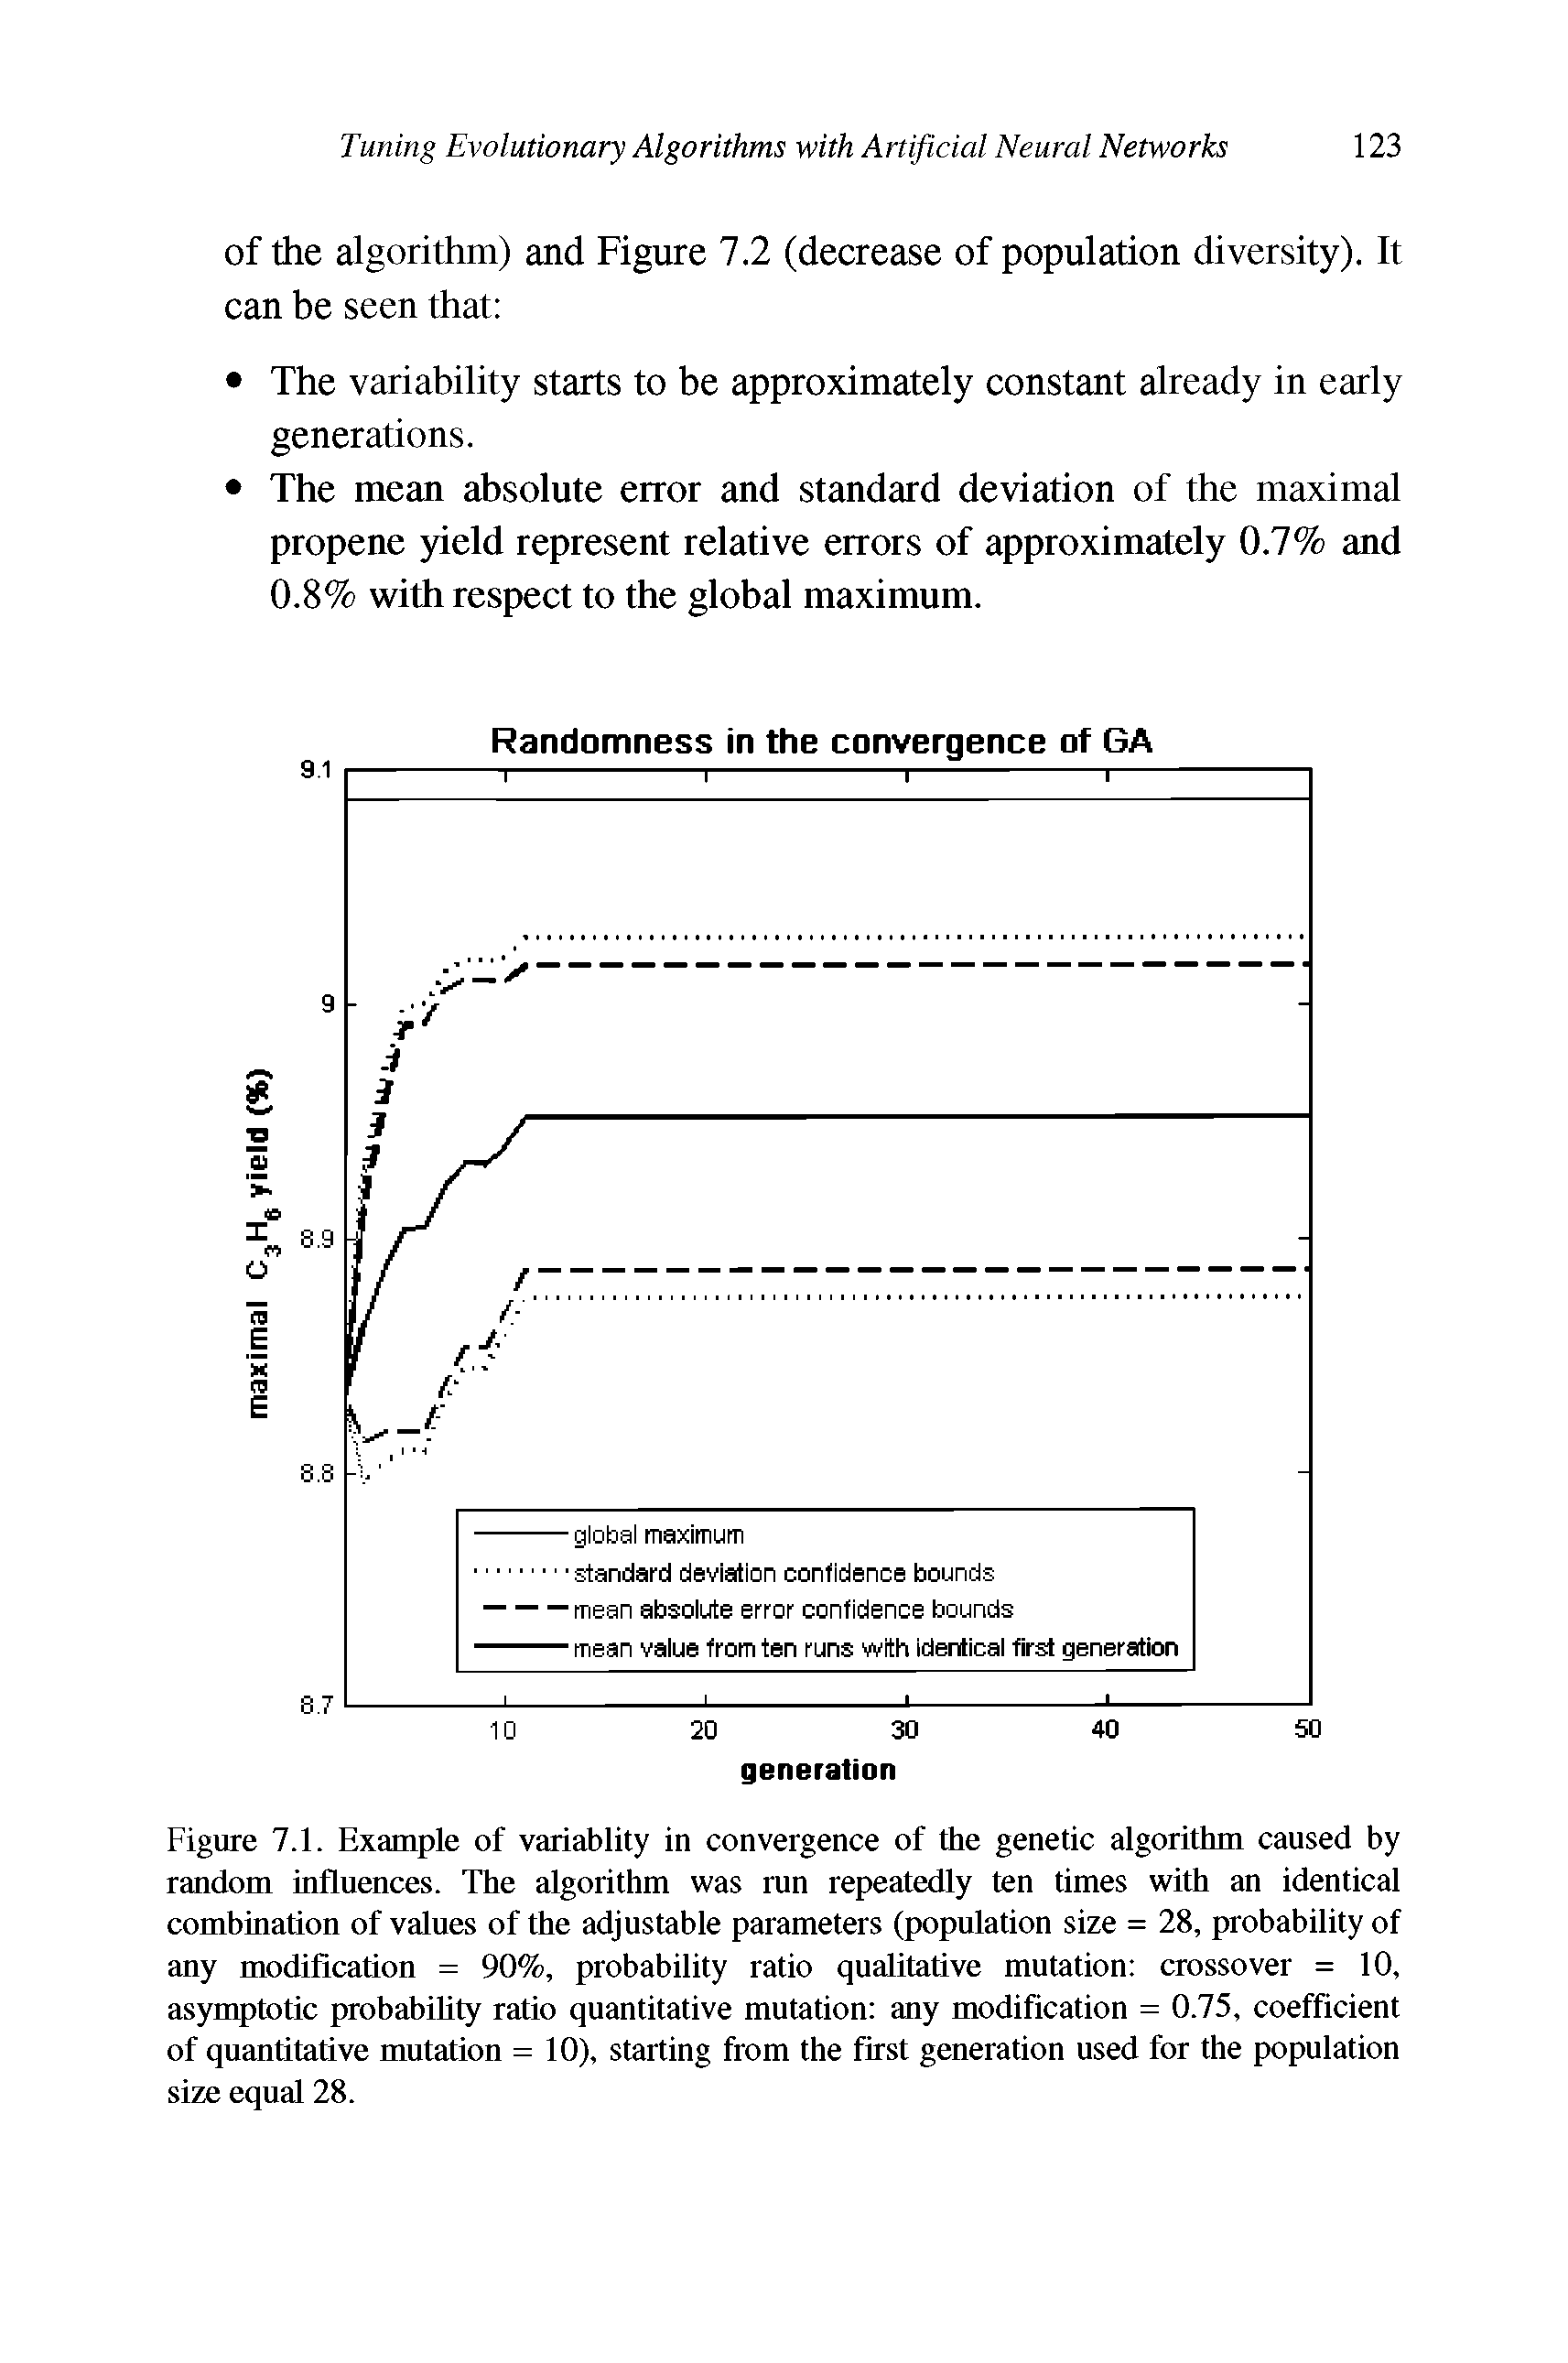 Figure 7.1. Example of variablity in convergence of the genetic algorithm caused by random influences. The algorithm was run repeatedly ten times with an identical comhination of values of the adjustable parameters (population size = 28, probability of any modification = 90%, probability ratio qualitative mutation crossover = 10, asymptotic probability ratio quantitative mutation any modification = 0.75, coefficient of quantitative mutation = 10), starting from the first generation used for the population size equal 28.